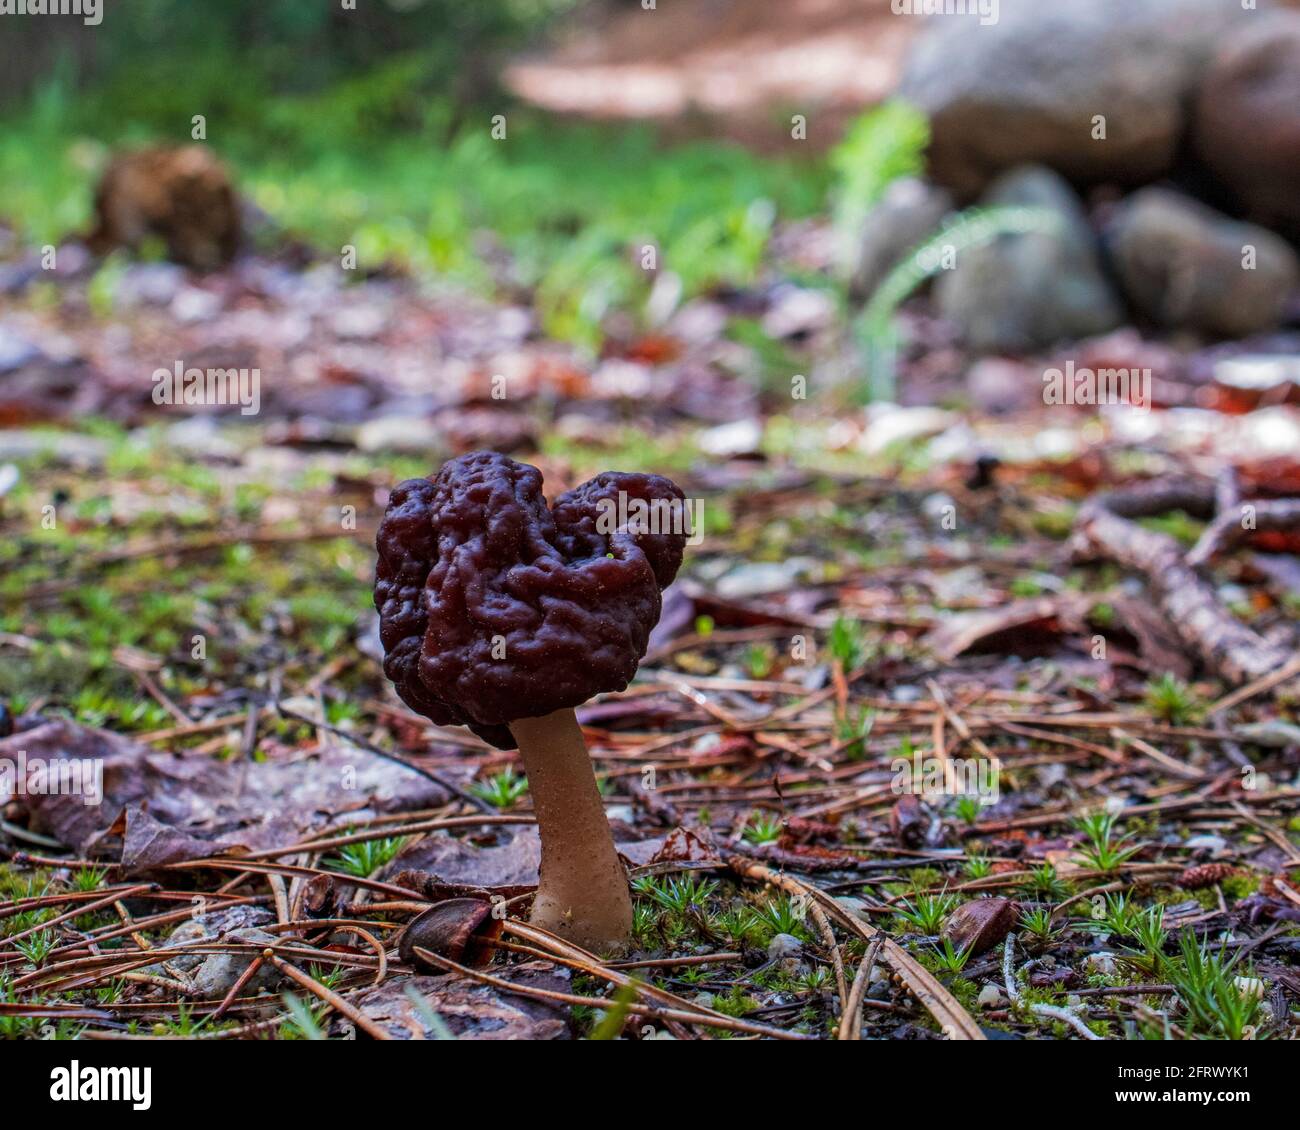 Wild mushroom growing on the forest floor in the spring Stock Photo